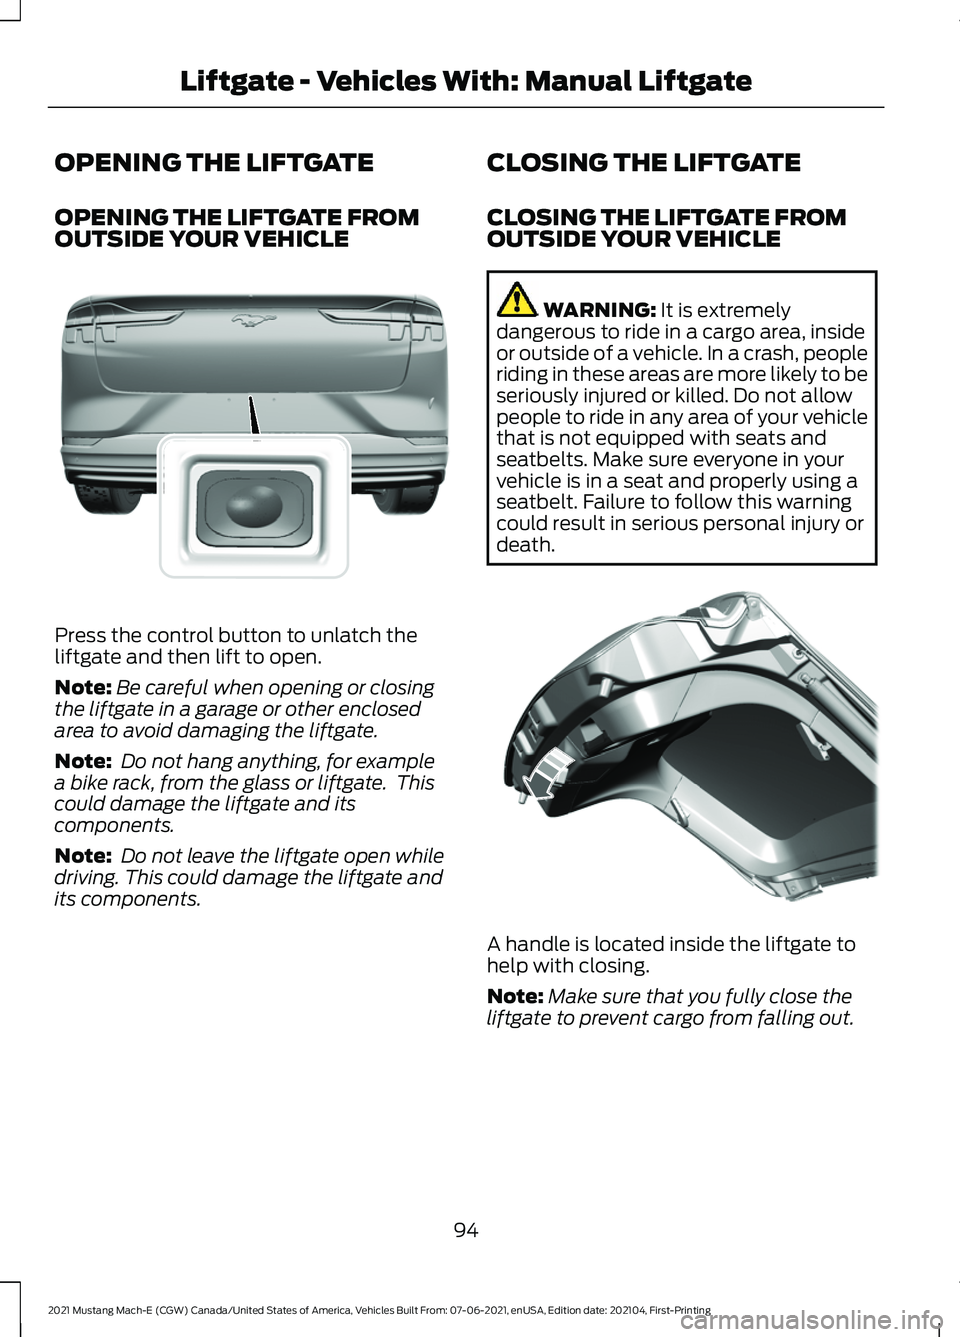 FORD MUSTANG MACH-E 2021 Owners Guide OPENING THE LIFTGATE
OPENING THE LIFTGATE FROM
OUTSIDE YOUR VEHICLE
Press the control button to unlatch the
liftgate and then lift to open.
Note:
Be careful when opening or closing
the liftgate in a g